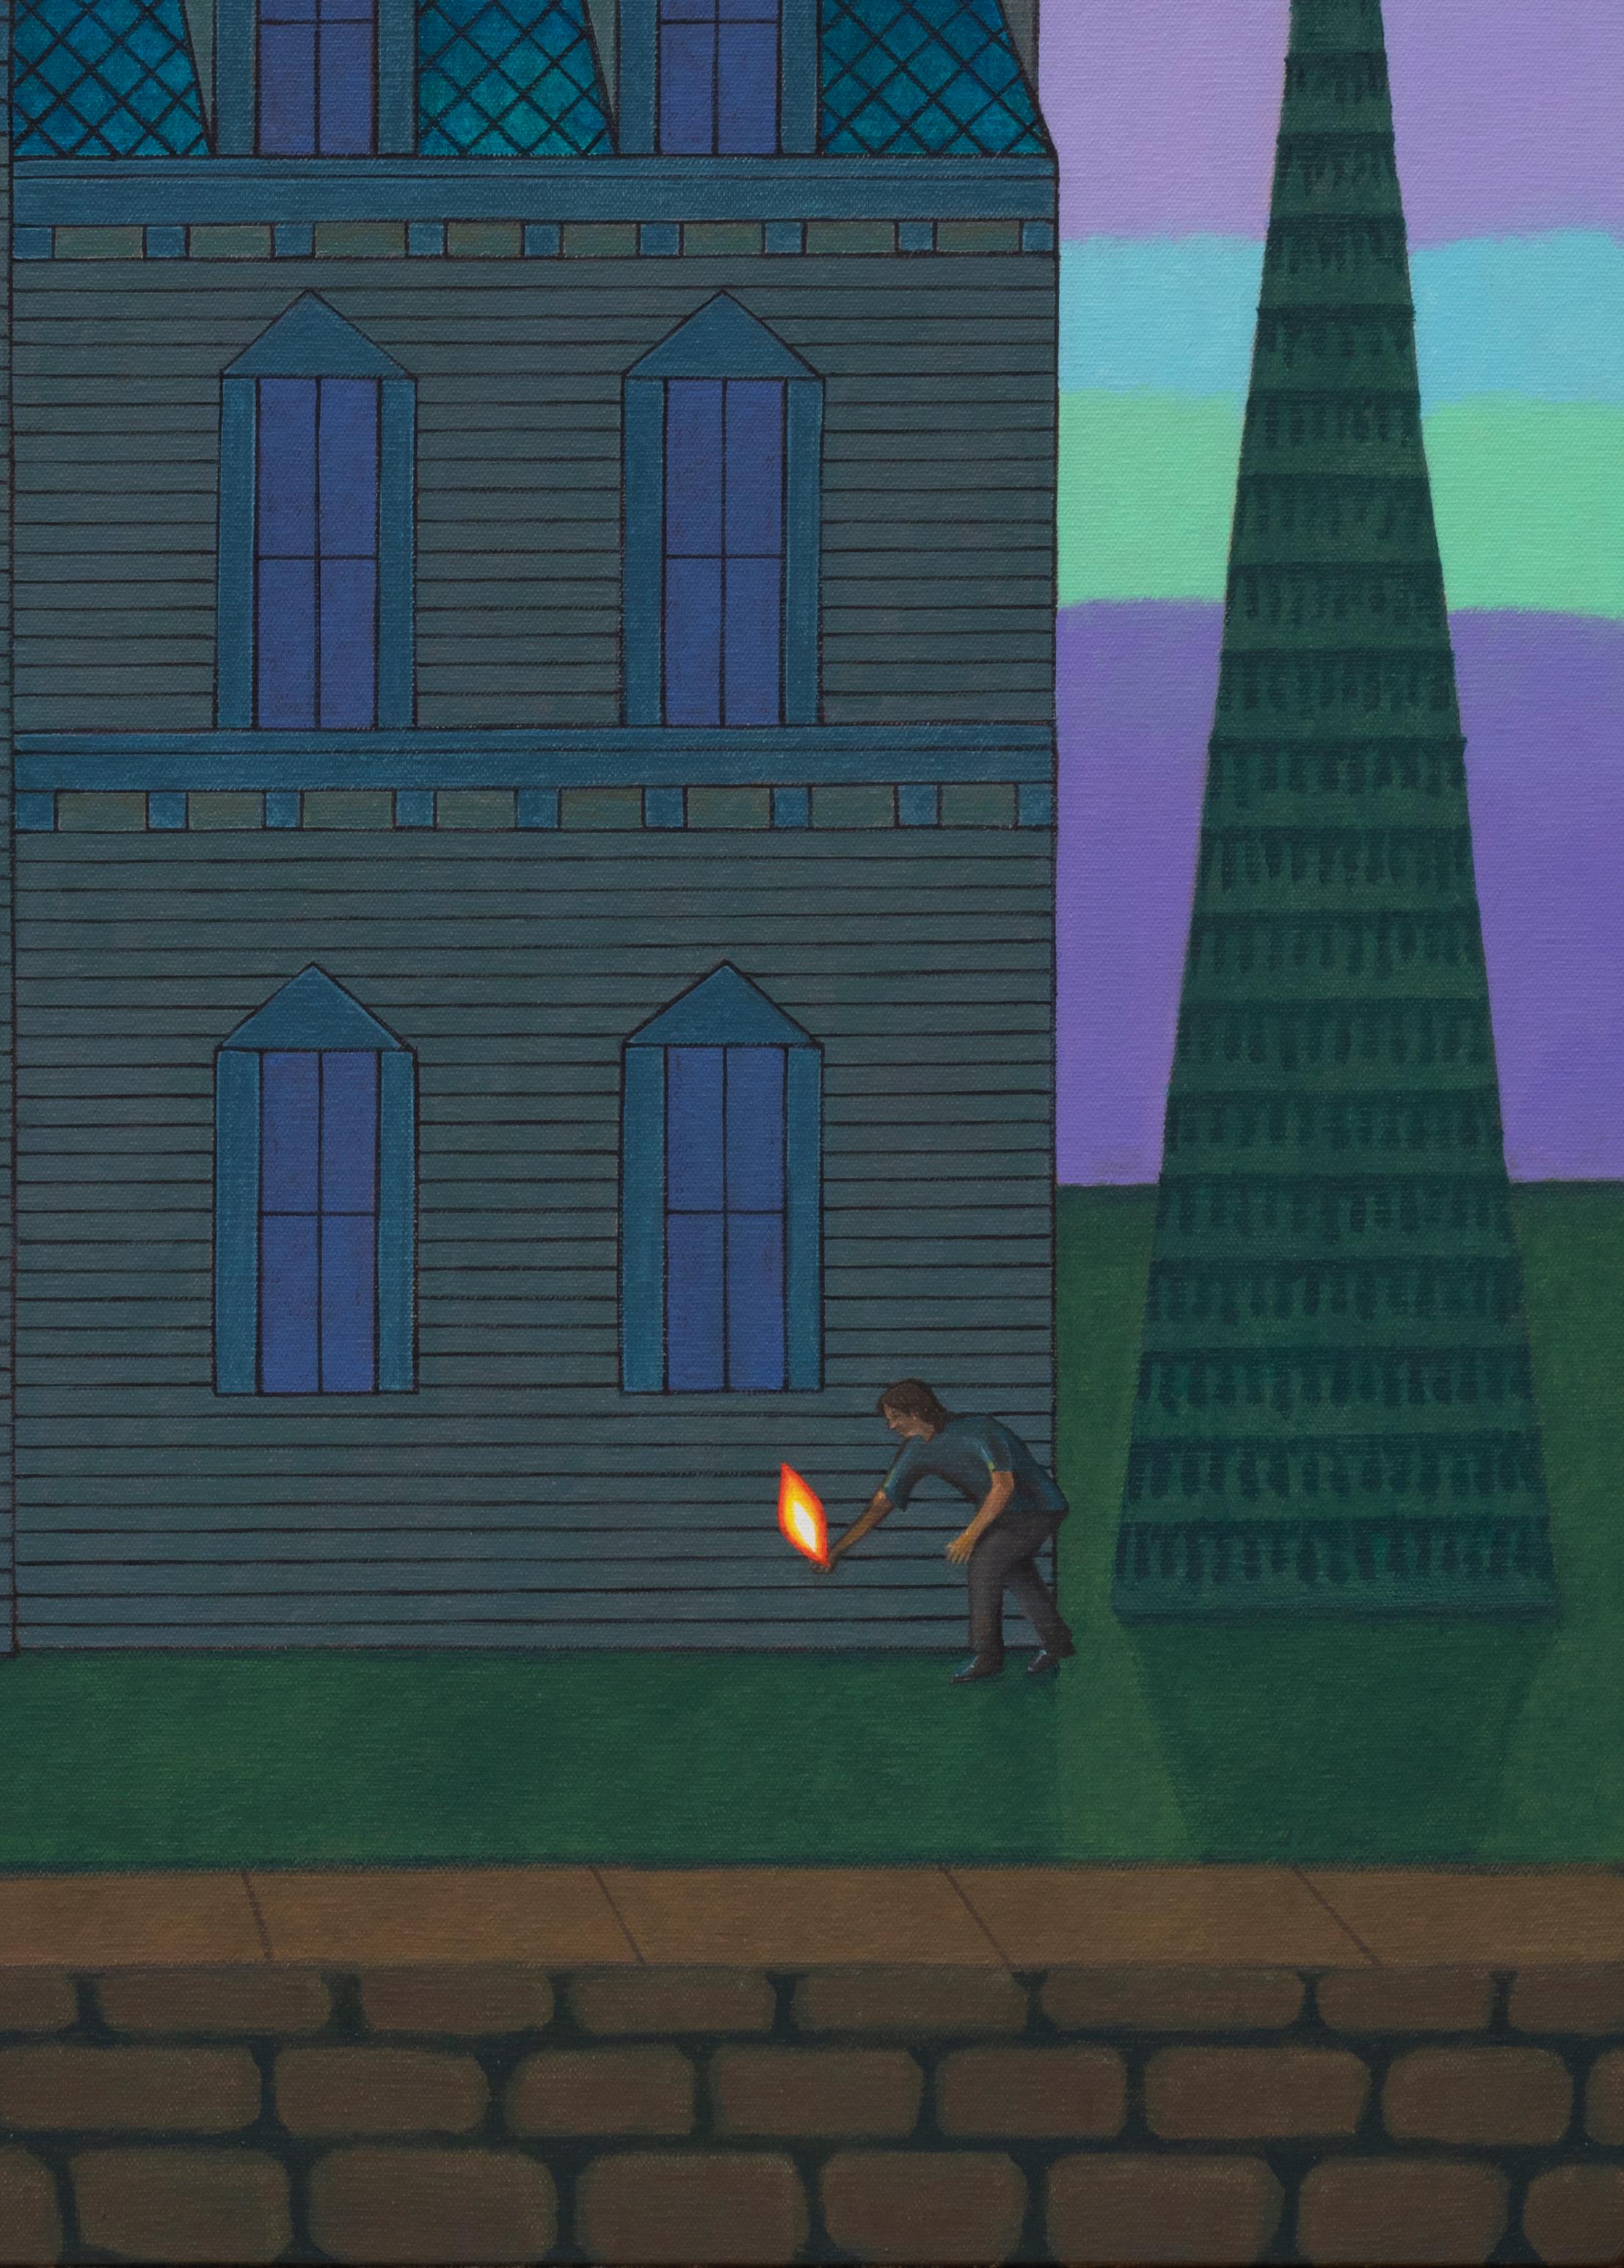 The Arsonist, Surreal Scene, Mansion Shrouded in Darkness, Lone Figure w/ Match 7